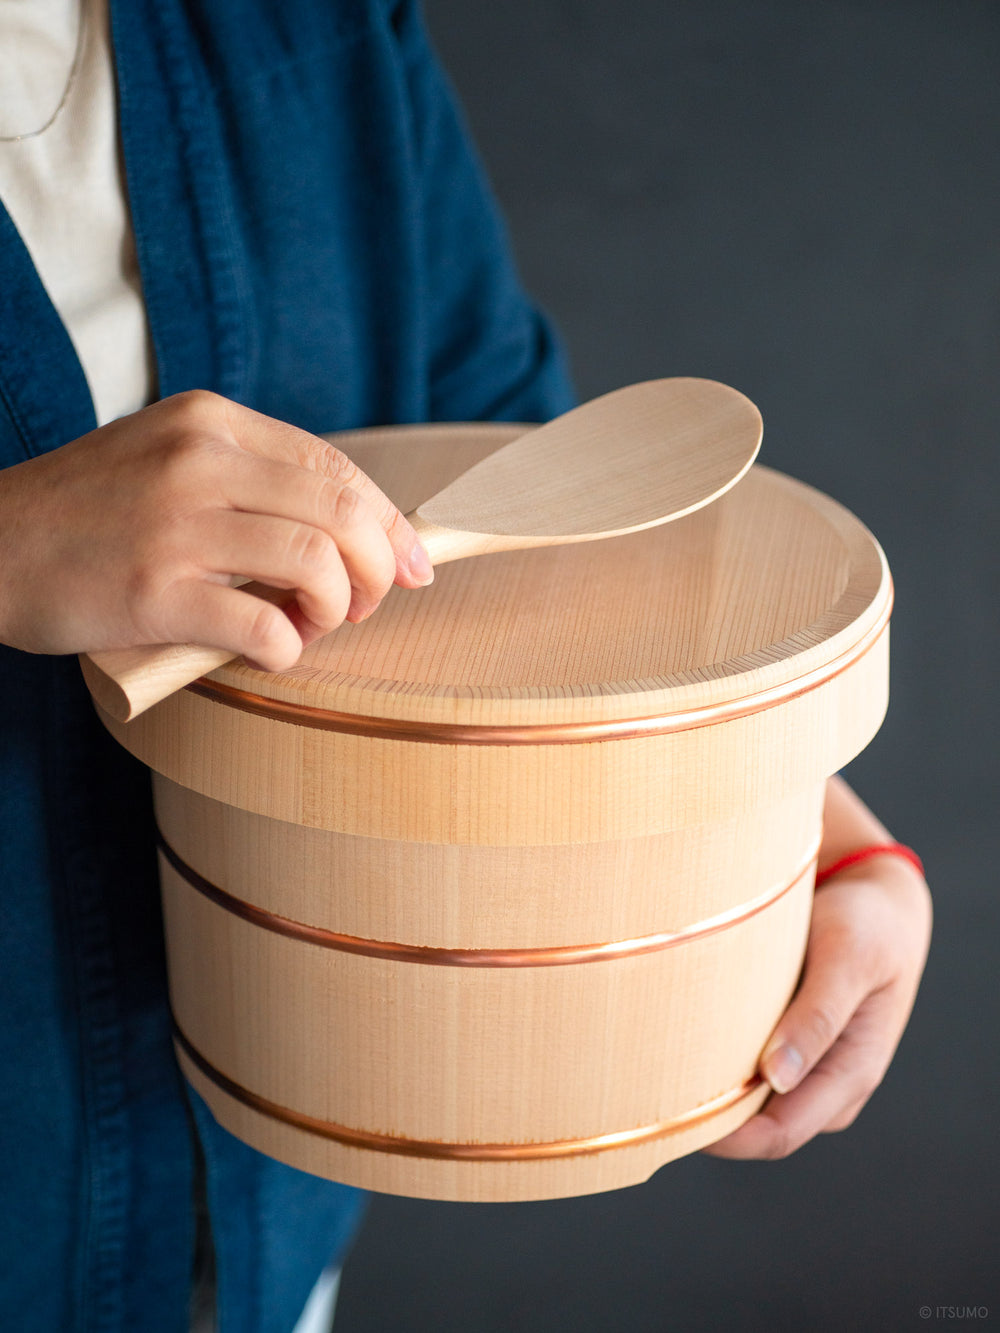 Hands holding a kiso sawara ohitsu rice chest with serving spoon